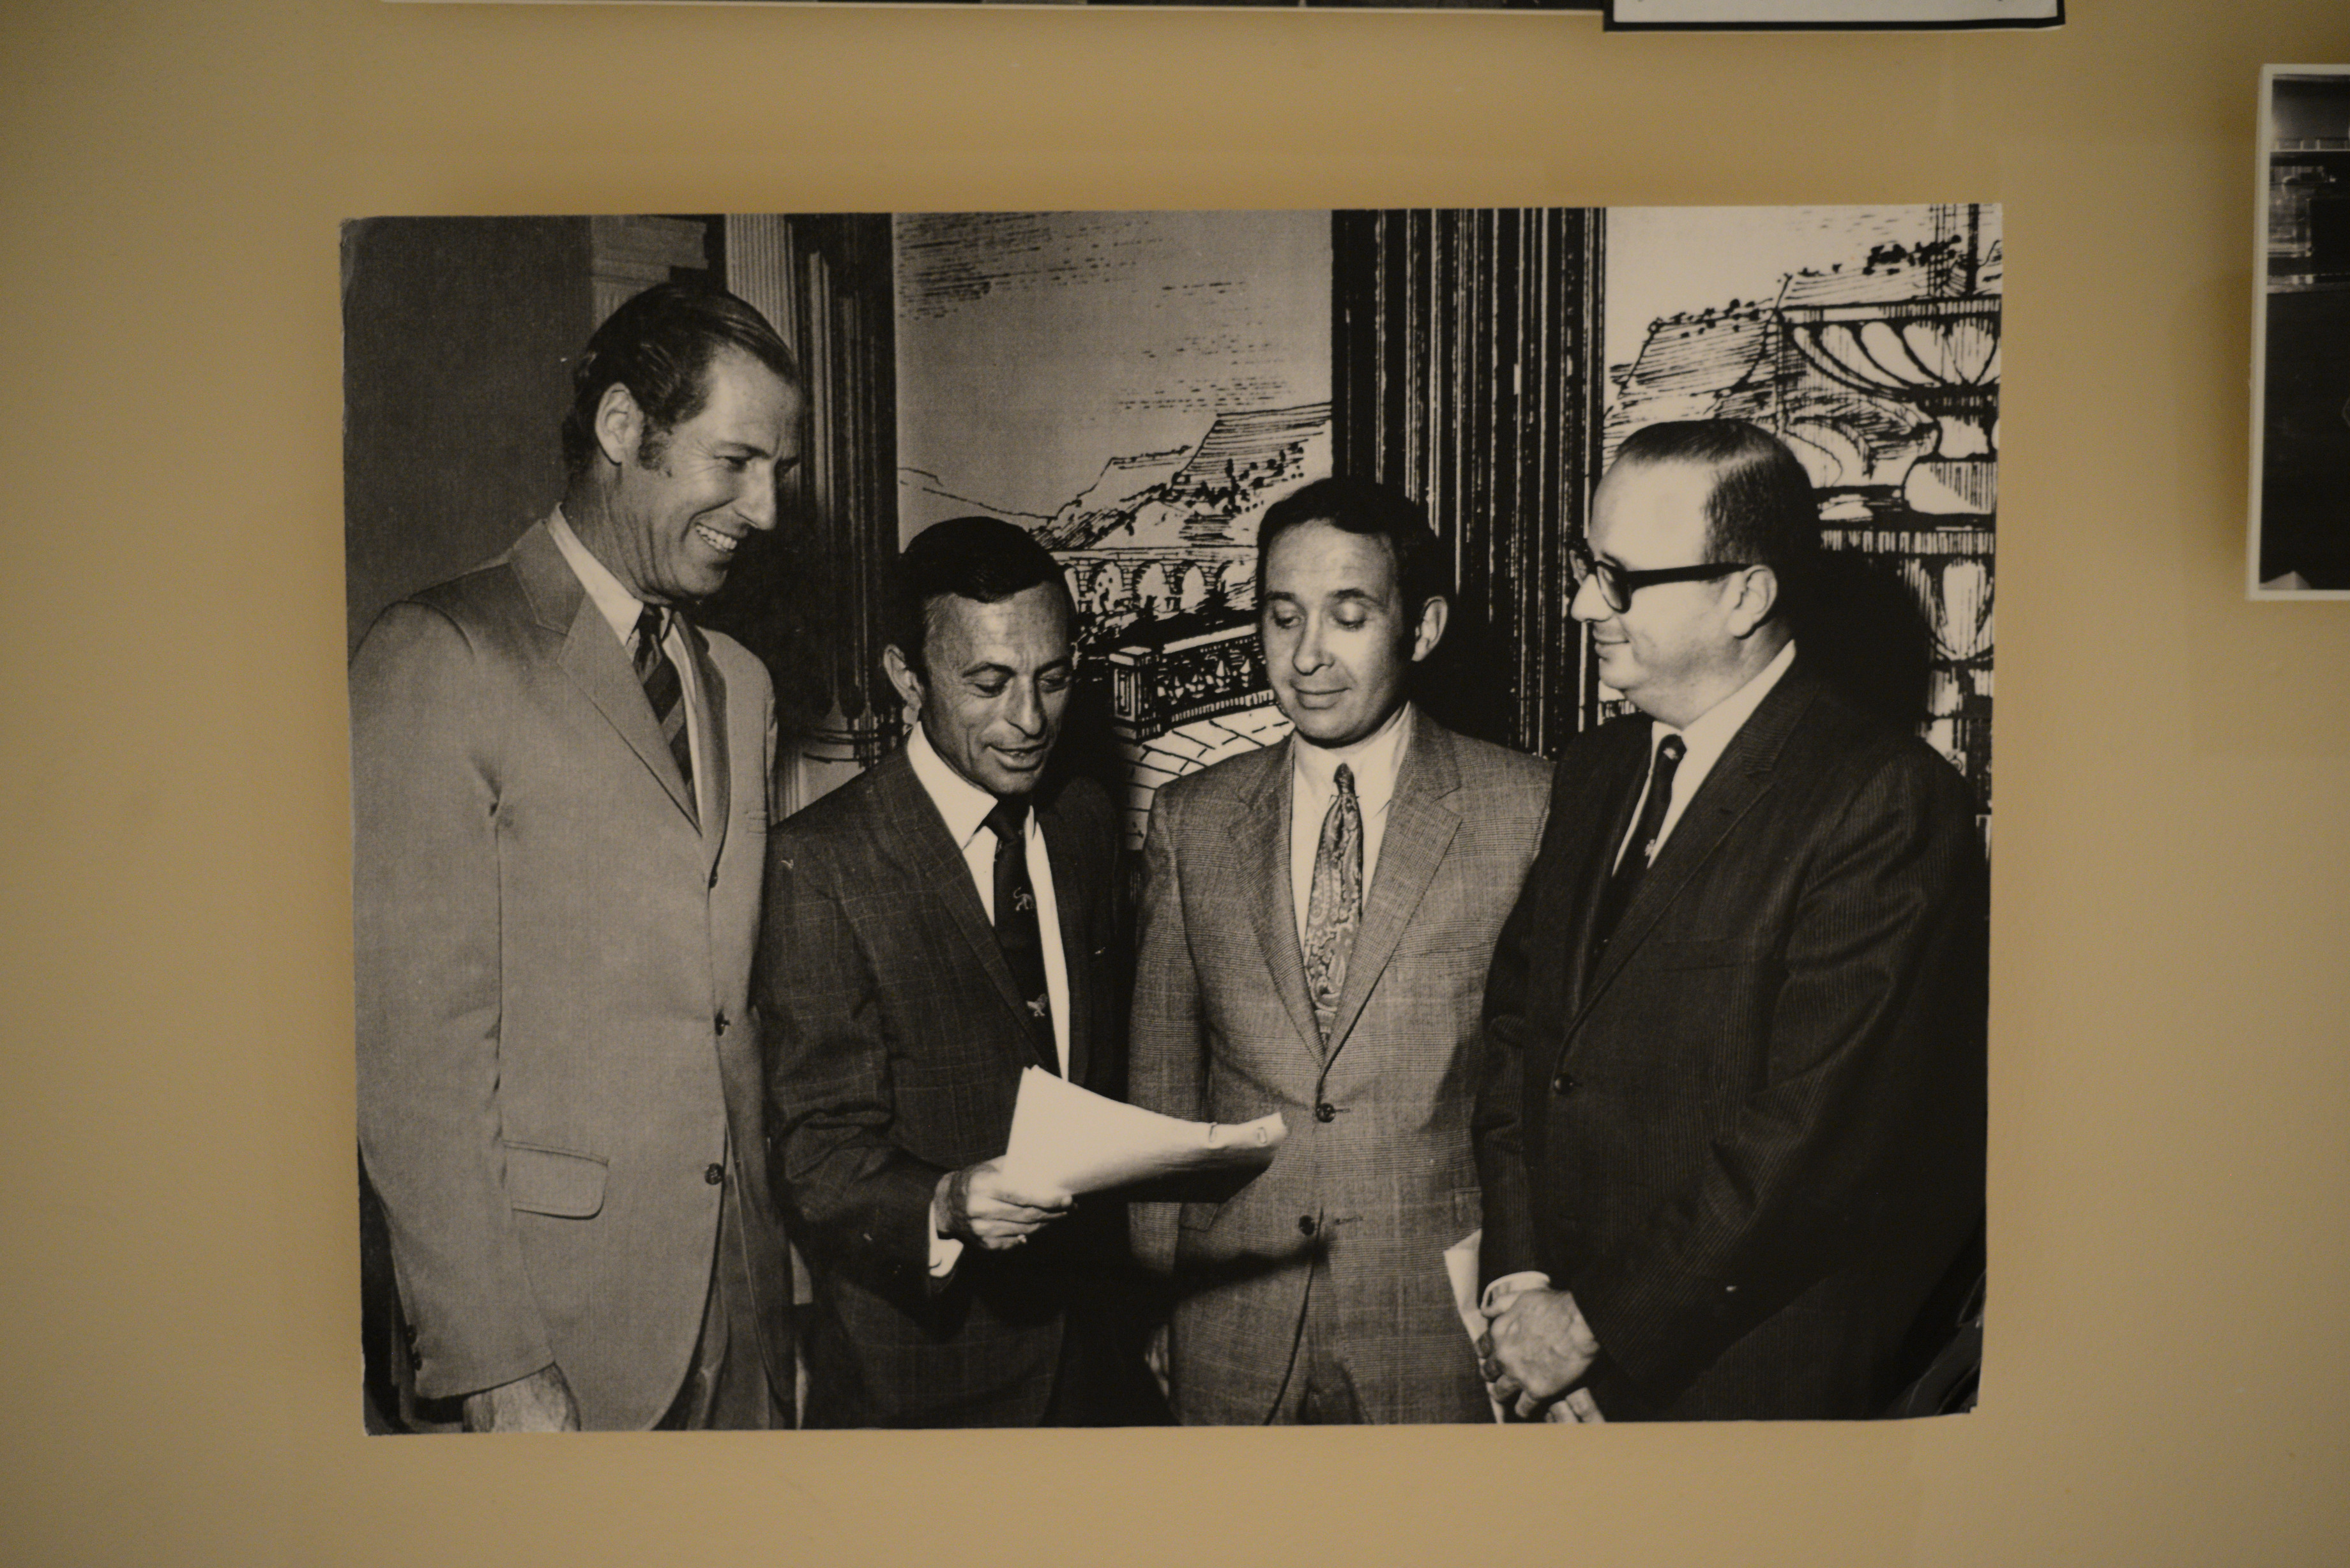 Photograph of Lloyd Katz and others, date unknown